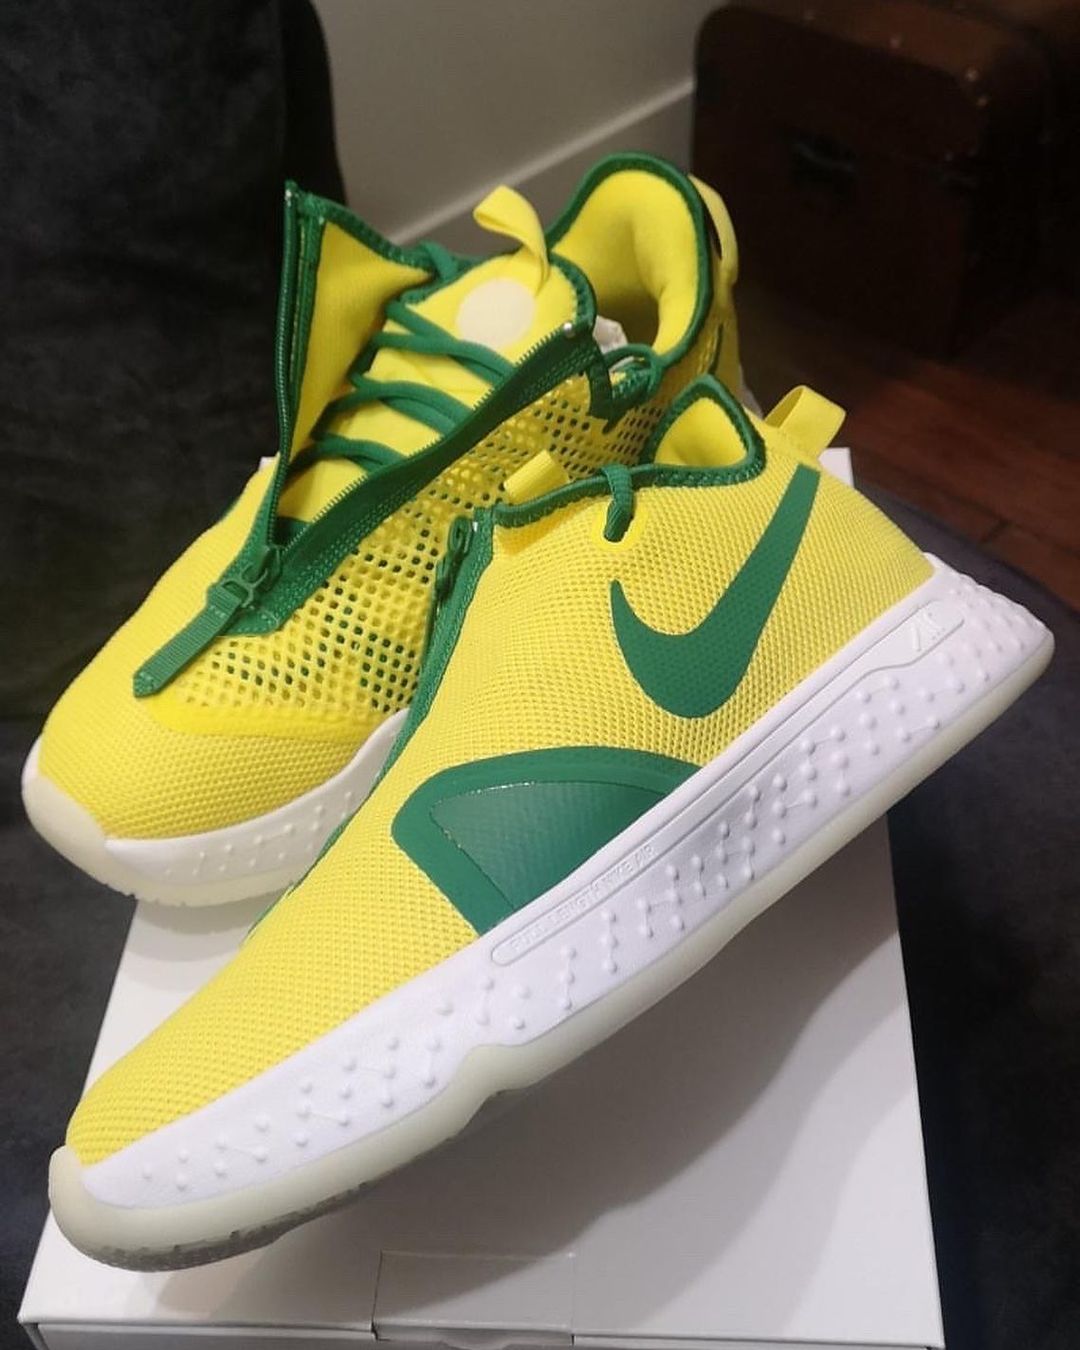 Nike By You iD PG 4 Opti Yellow Clover